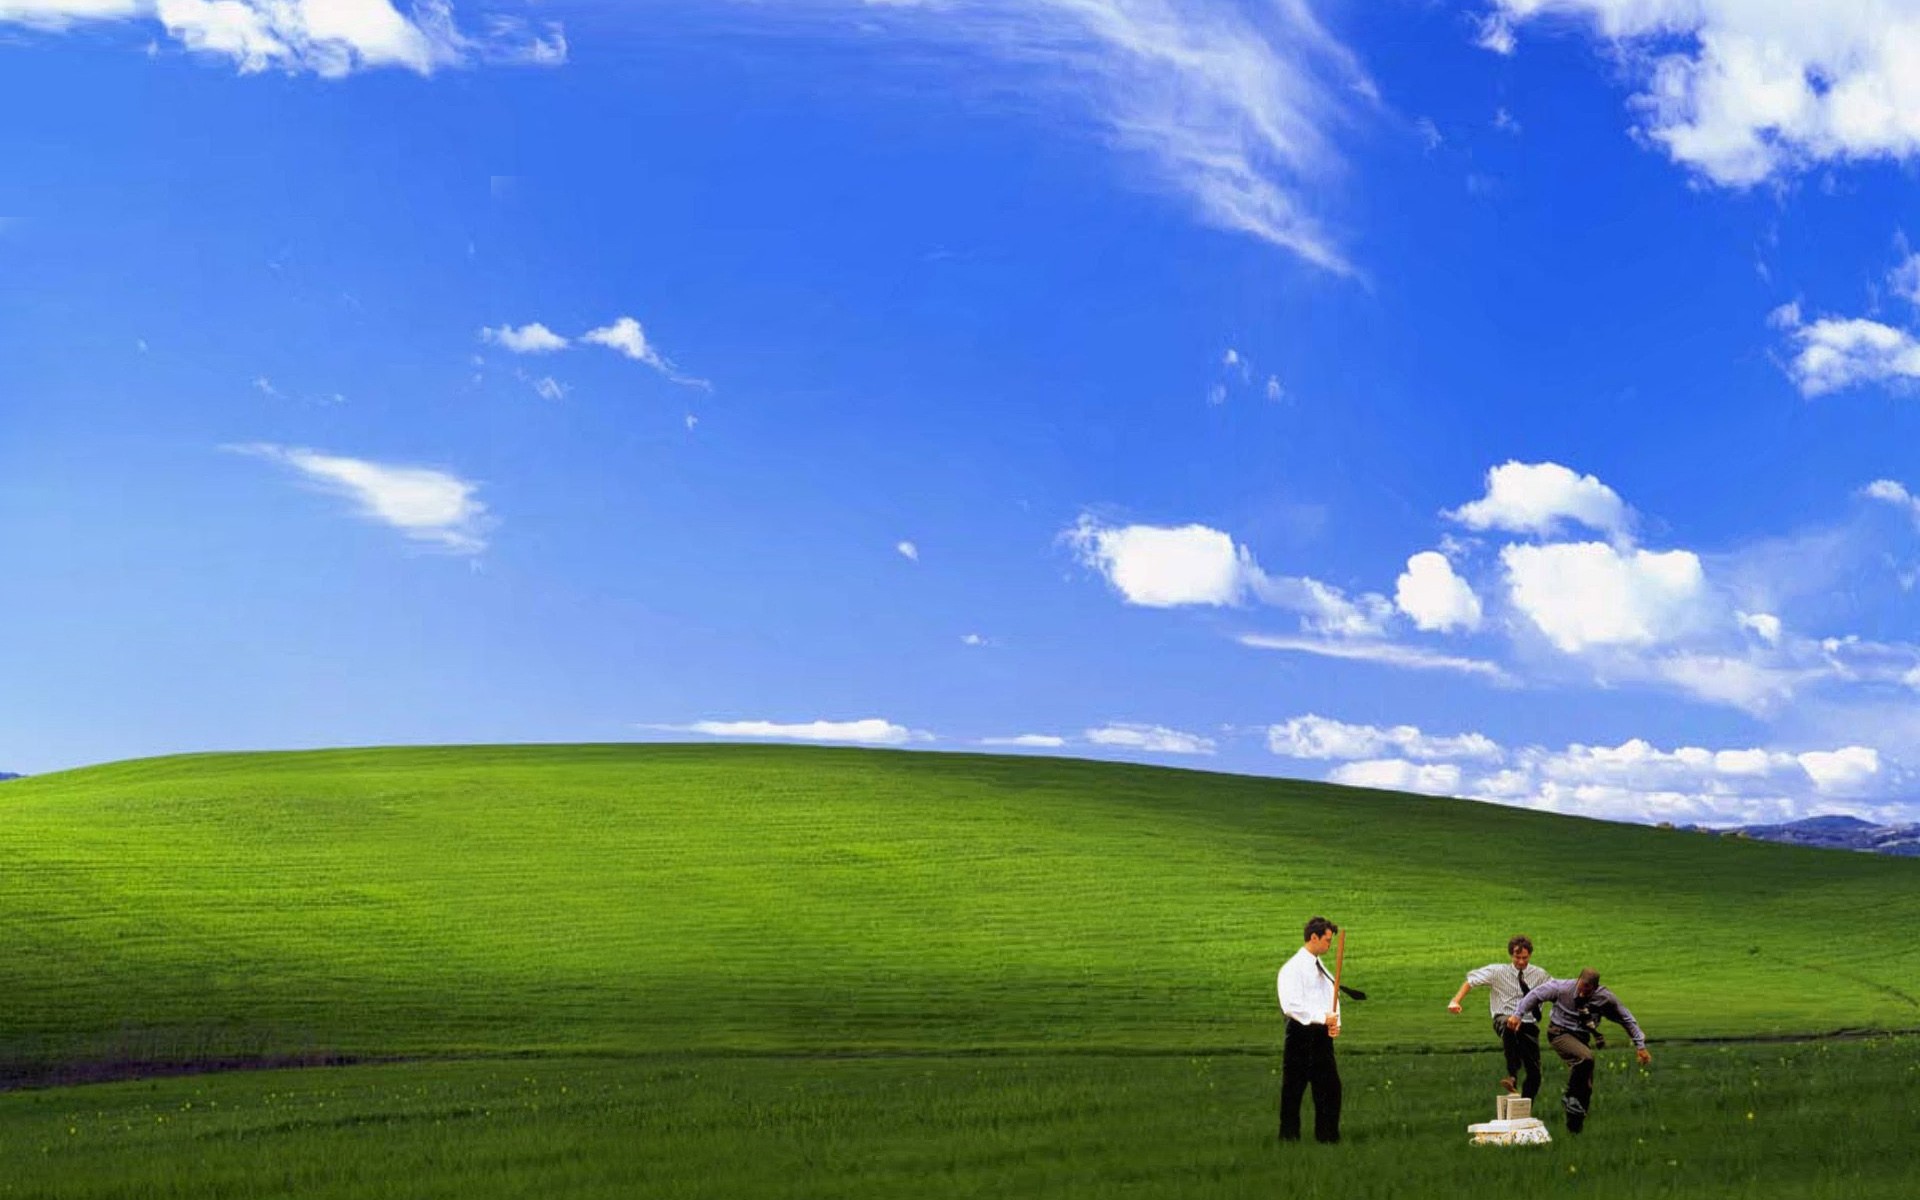 Just Your Typical Windows Background Kind Of